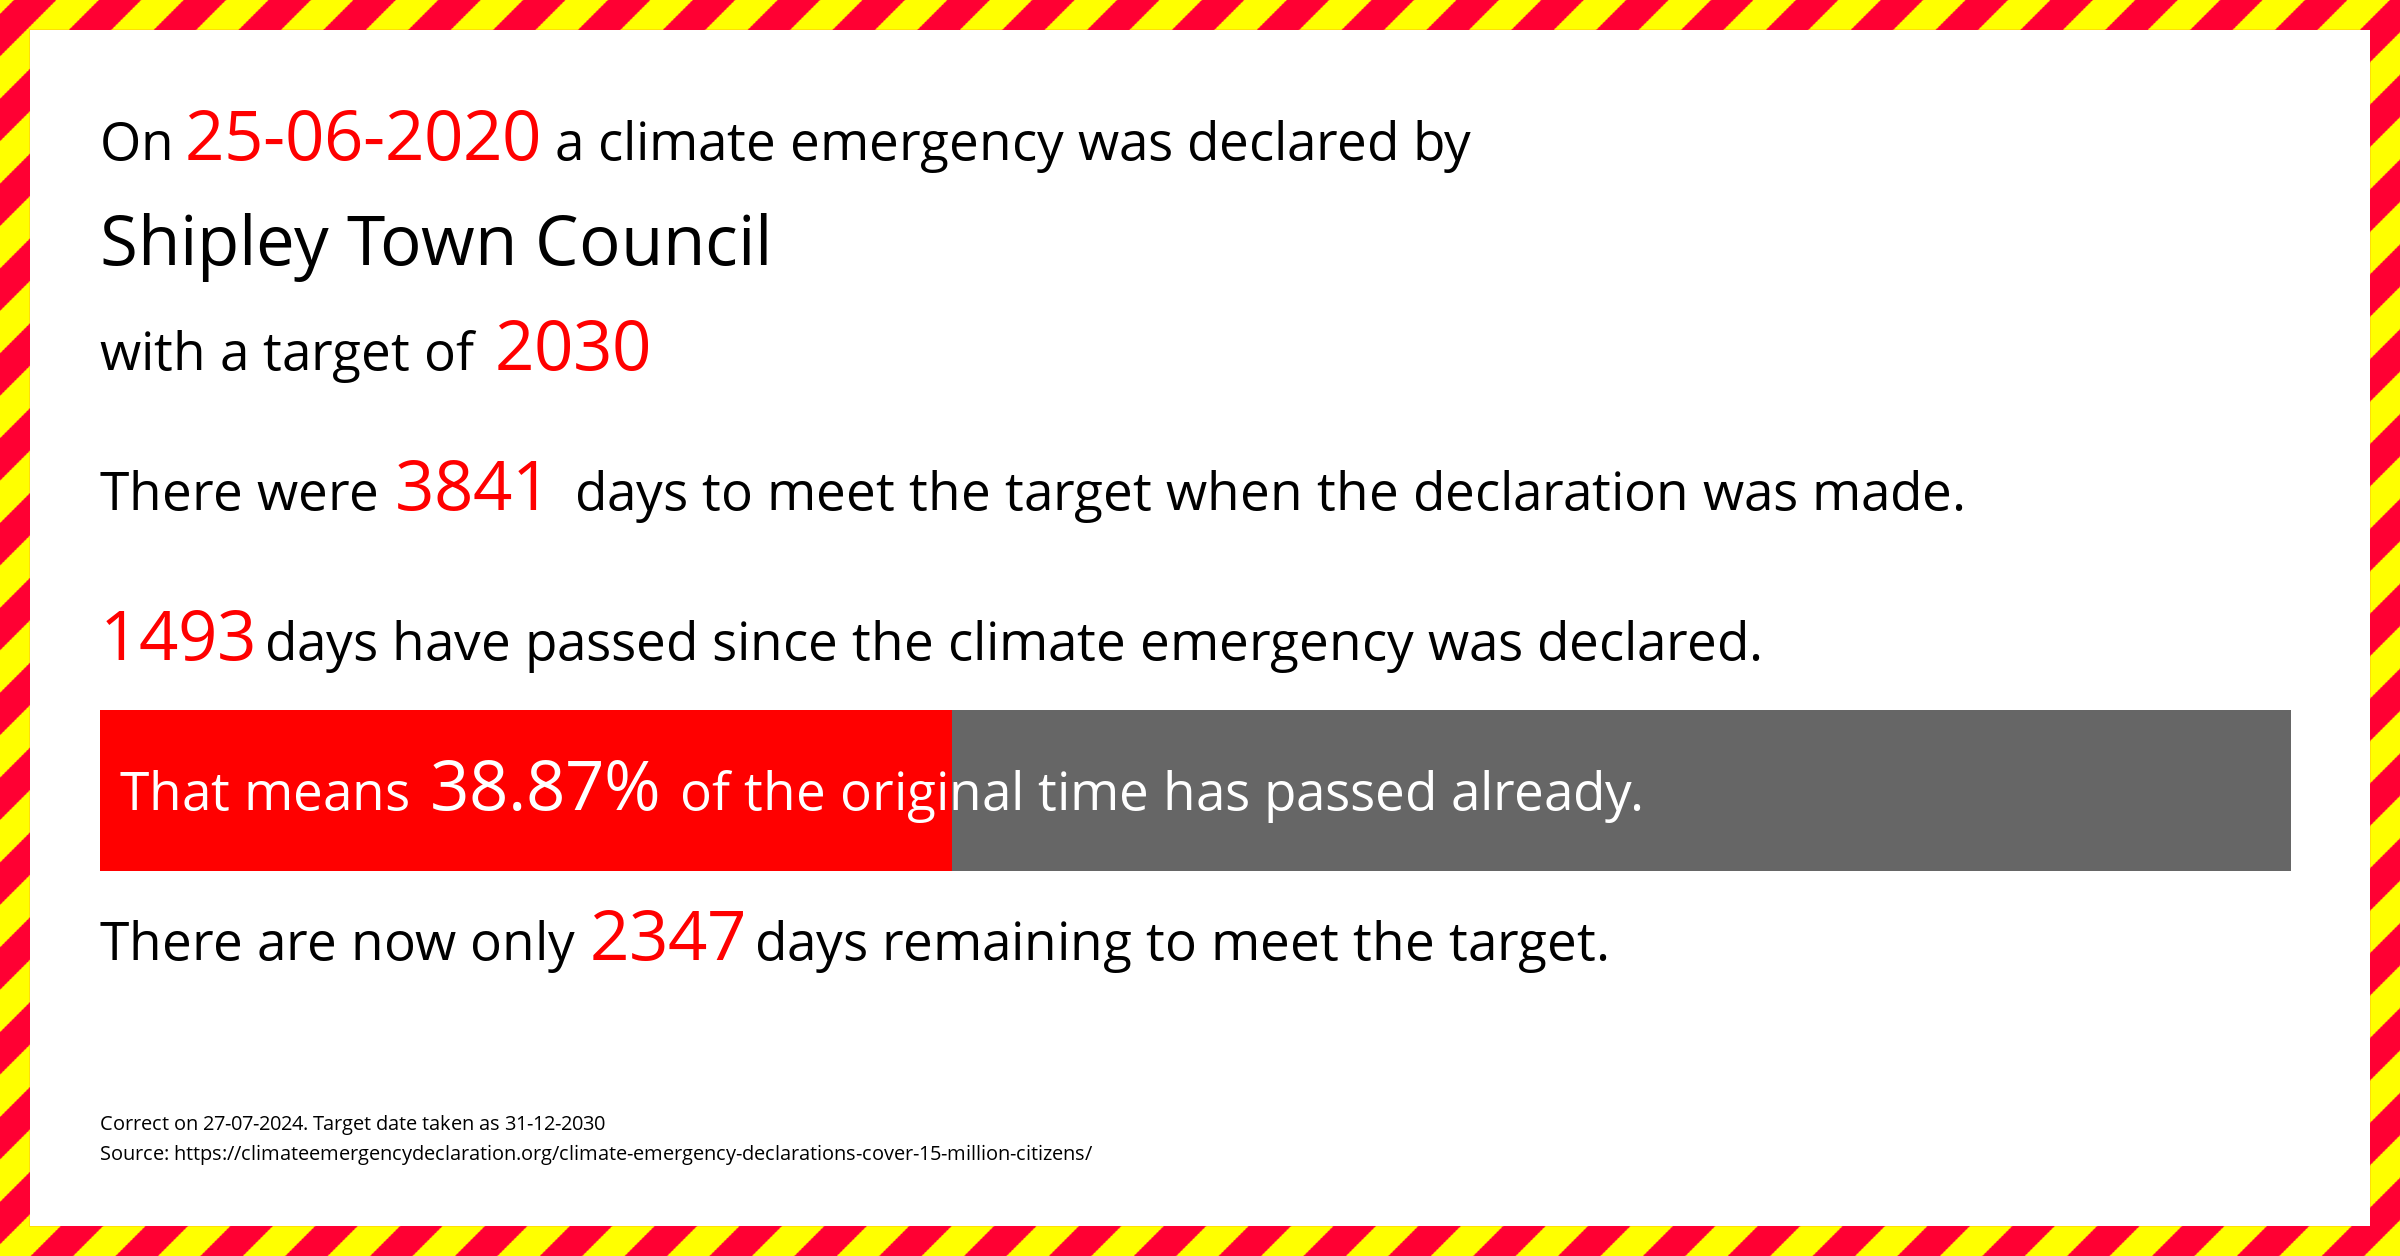 Shipley Town Council  declared a Climate emergency on Thursday 25th June 2020, with a target of 2030.